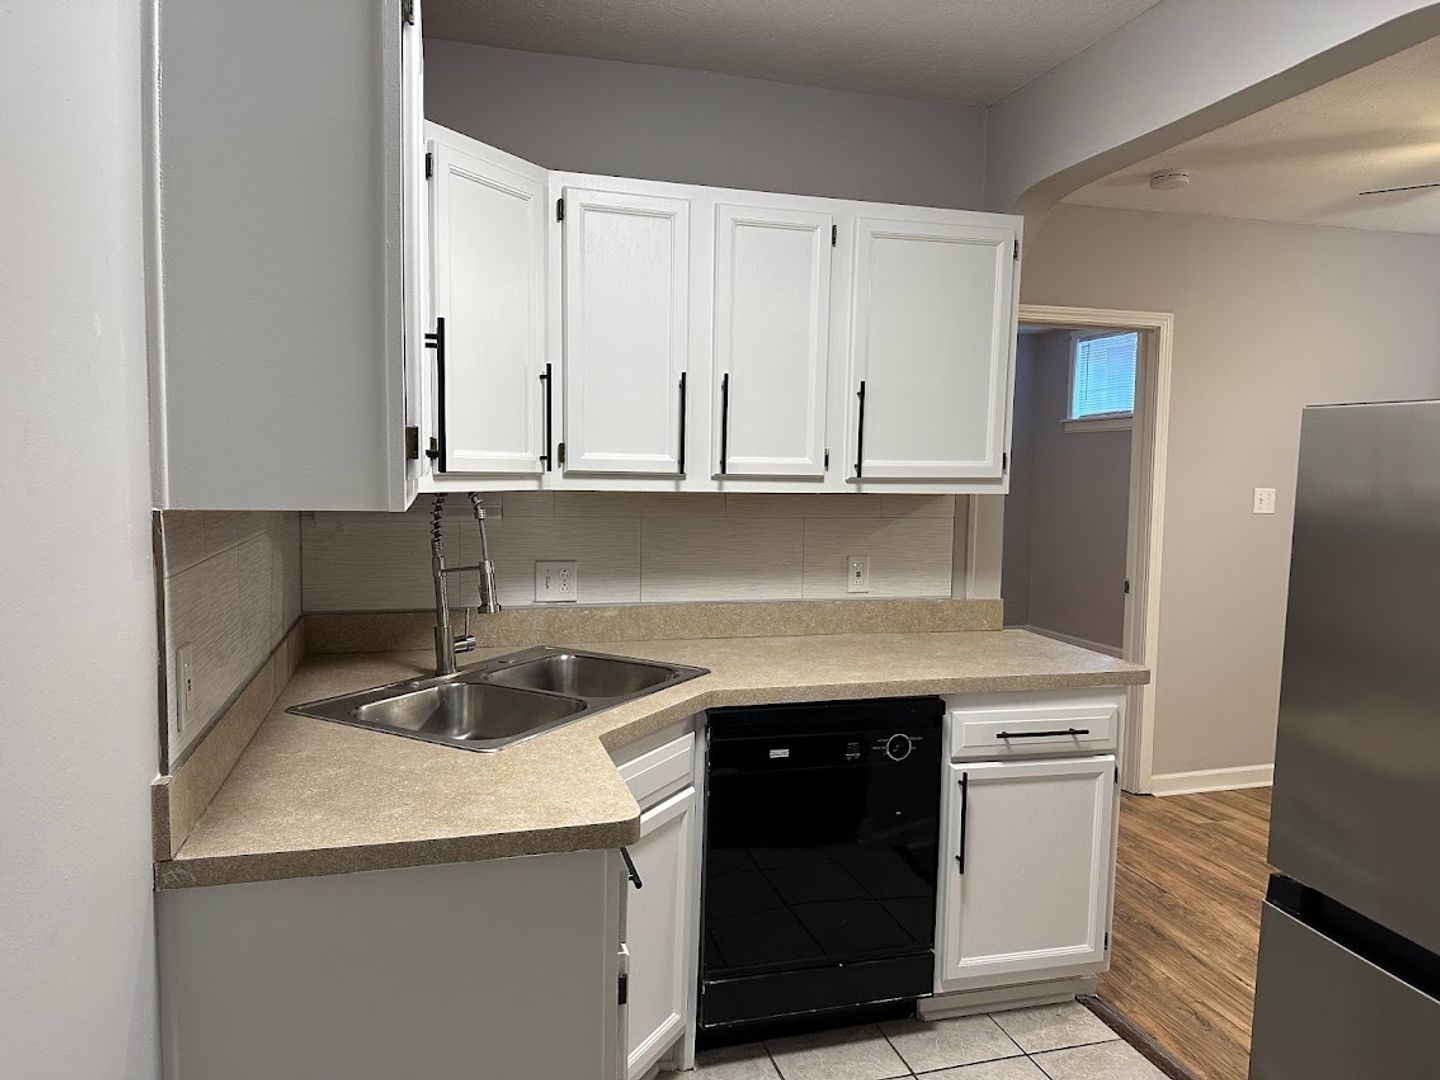 1 Bed and  1 Bath Apartment Unit for Rent in Cleveland Heights | Prime Location! Image